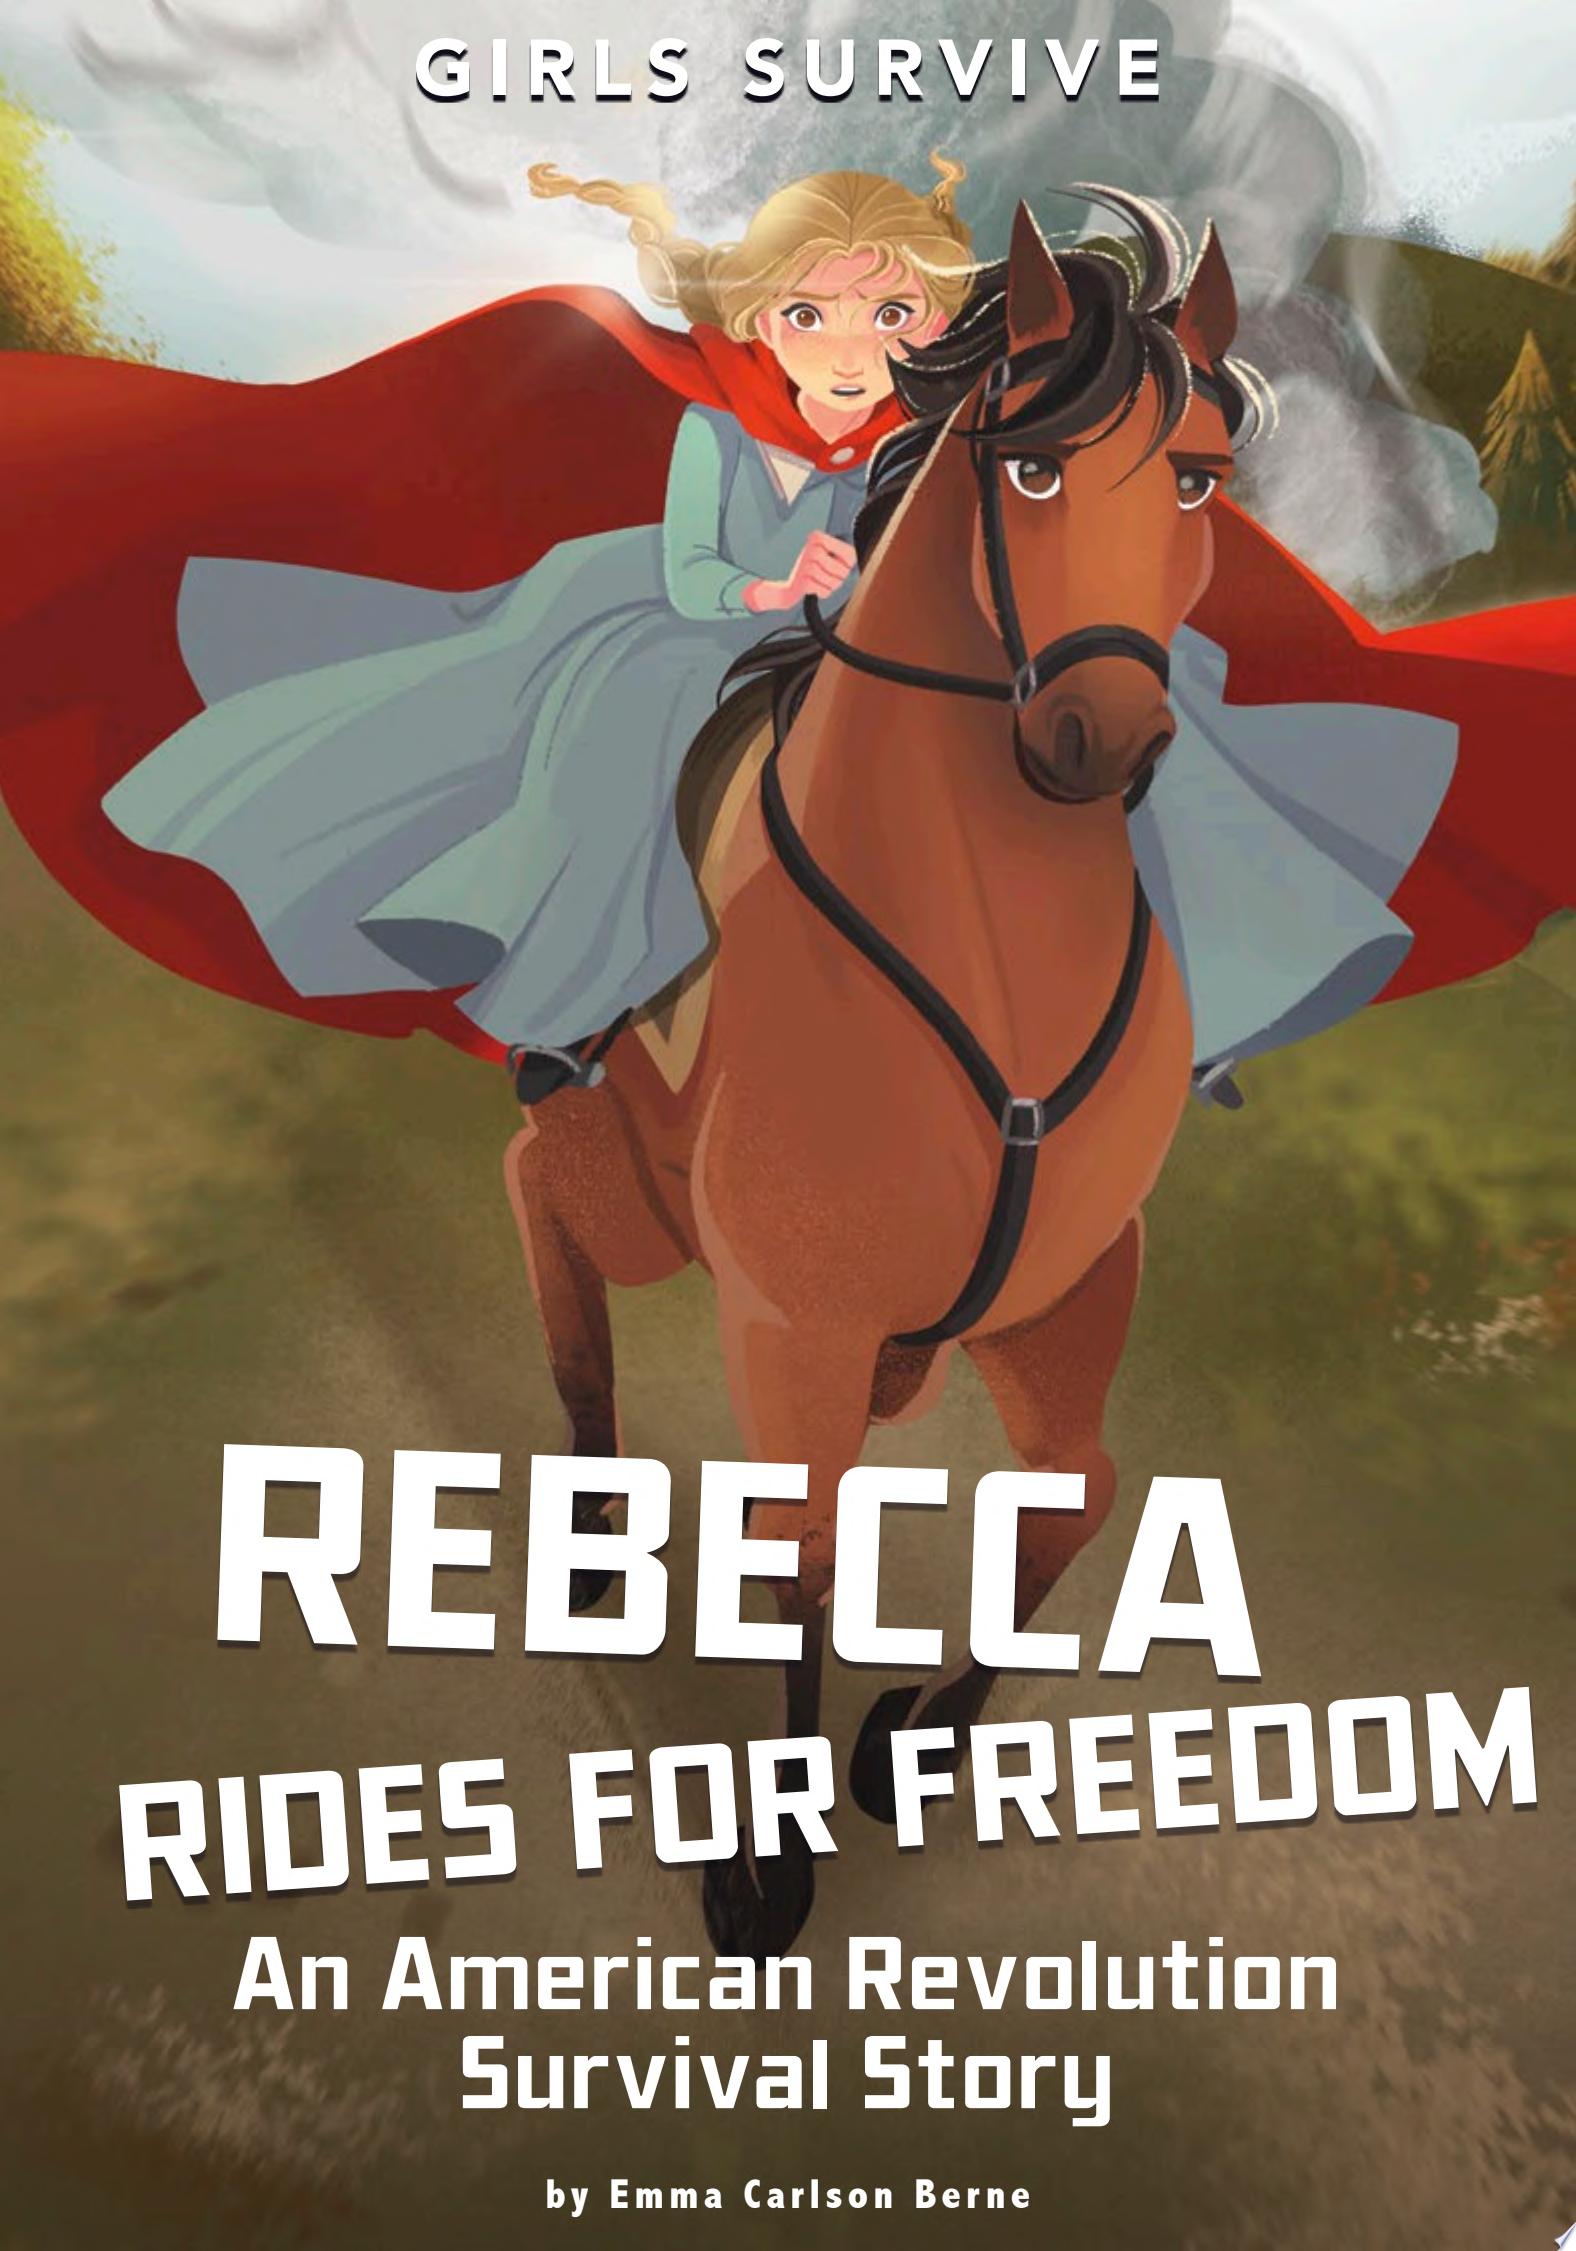 Image for "Rebecca Rides for Freedom"